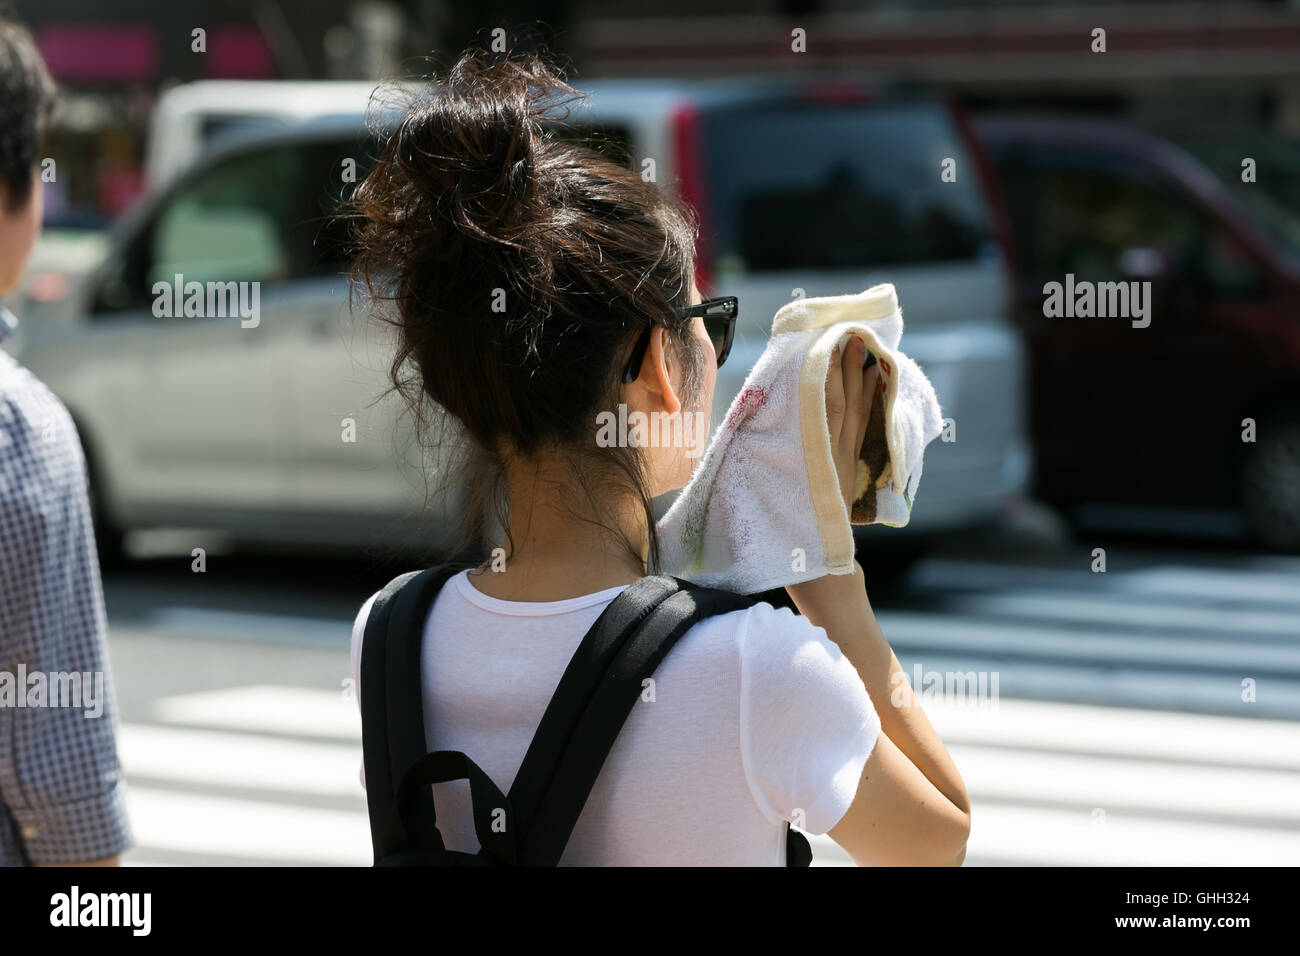 A woman wipes her sweat on a hot day in downtown Tokyo on August 5, 2016, Tokyo, Japan. The Japan Meteorological Agency registered temperatures of 35C degrees in Tokyo, making this one of the hottest days of the year. The current heatwave is expected to bring hot days next week across country. The government issued heat stroke warnings because of the high temperatures. © Rodrigo Reyes Marin/AFLO/Alamy Live News Stock Photo